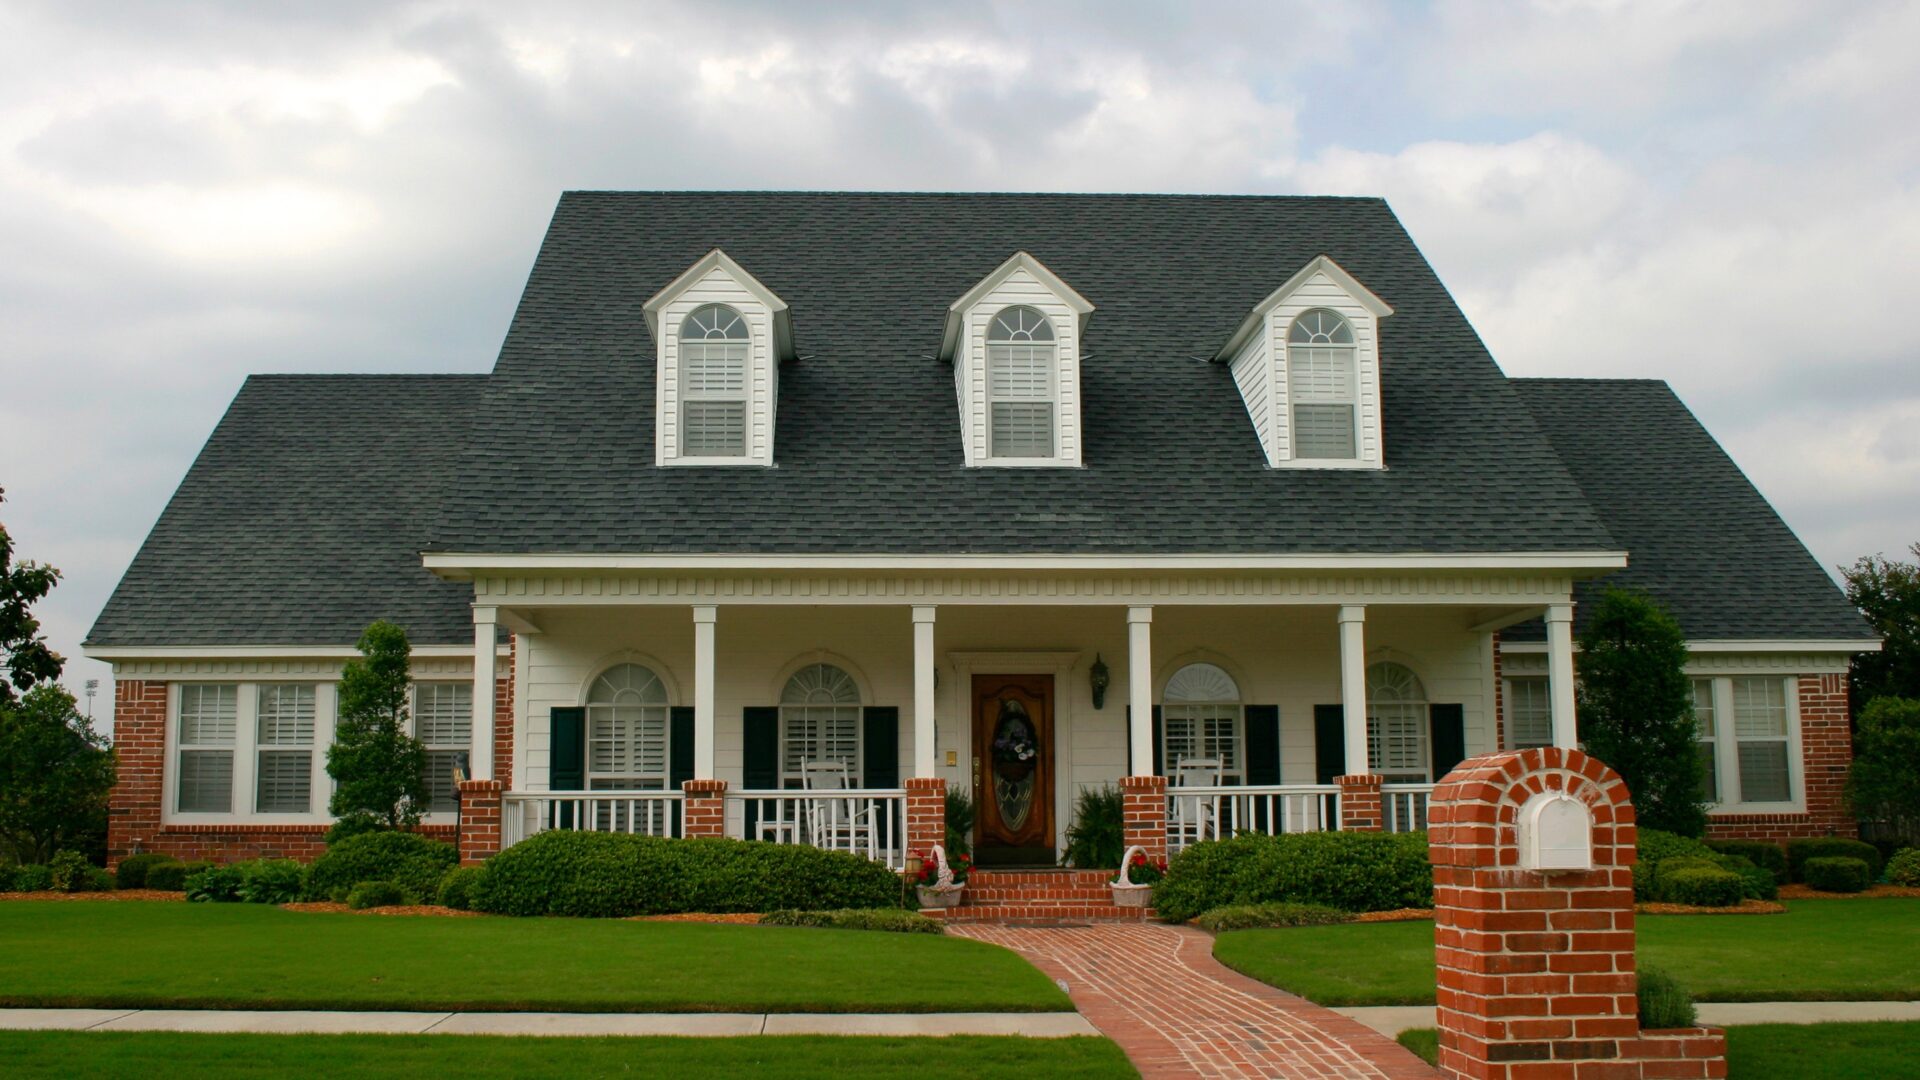 A large home with gray shingle roofing and three dormer windows